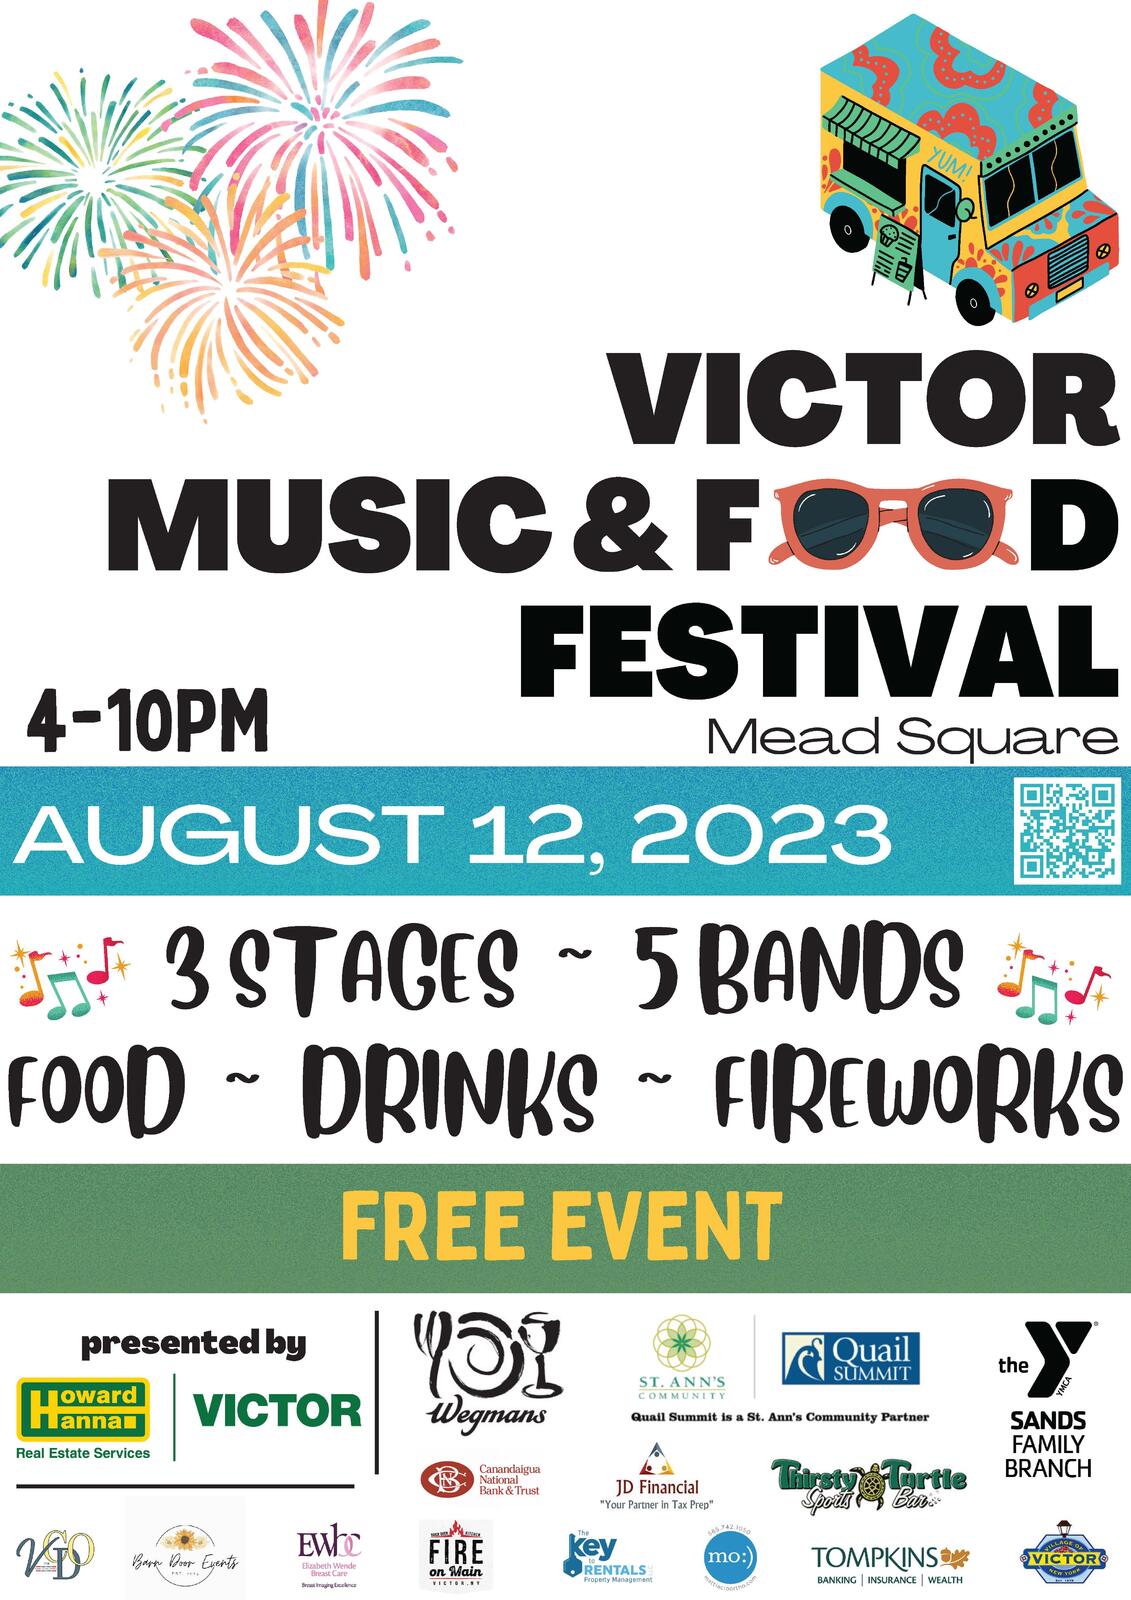 Victor Music & Food Festival August 12, 2023 Town of Victor